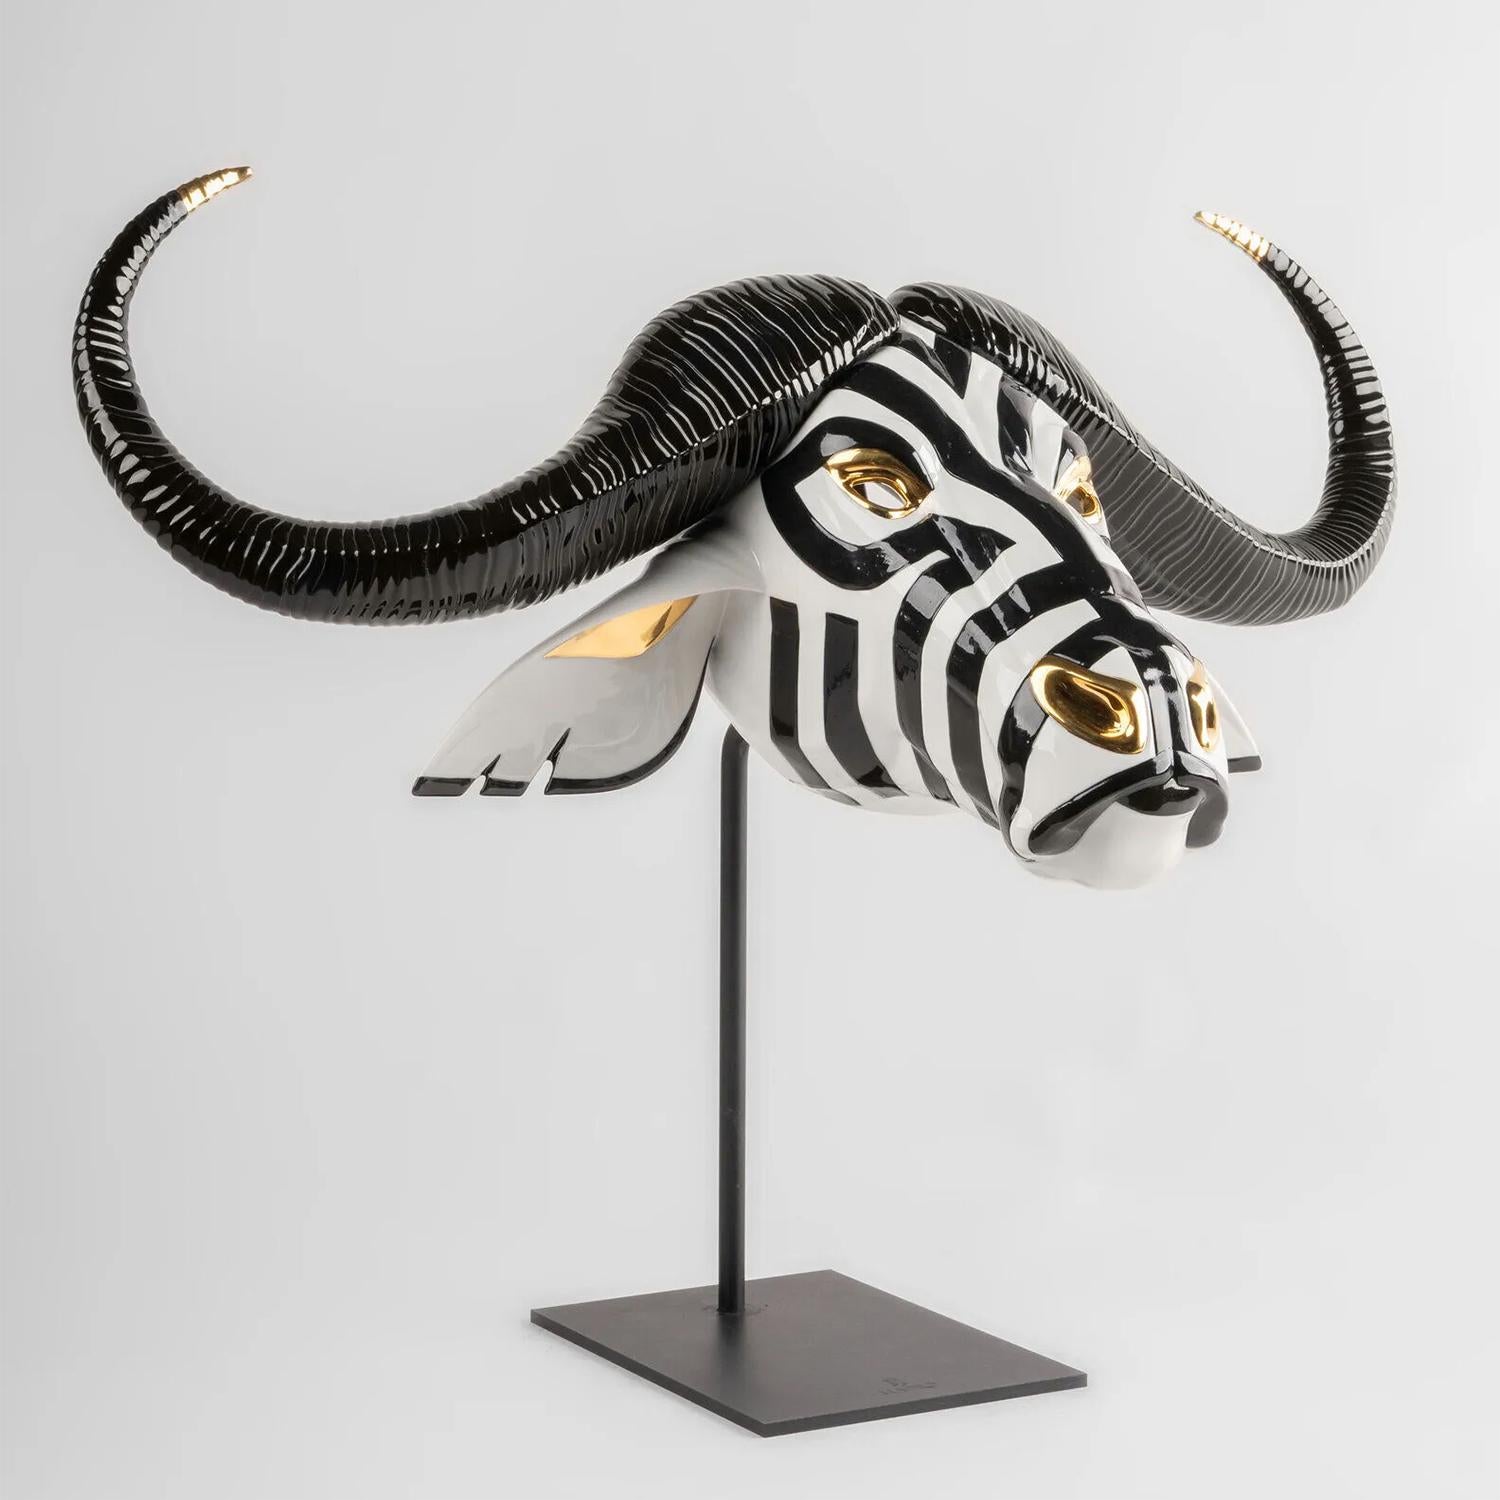 Sculpture Buffalo Head with all structure in 
porcelain in black and white and shiny gold finish.
On metal base.